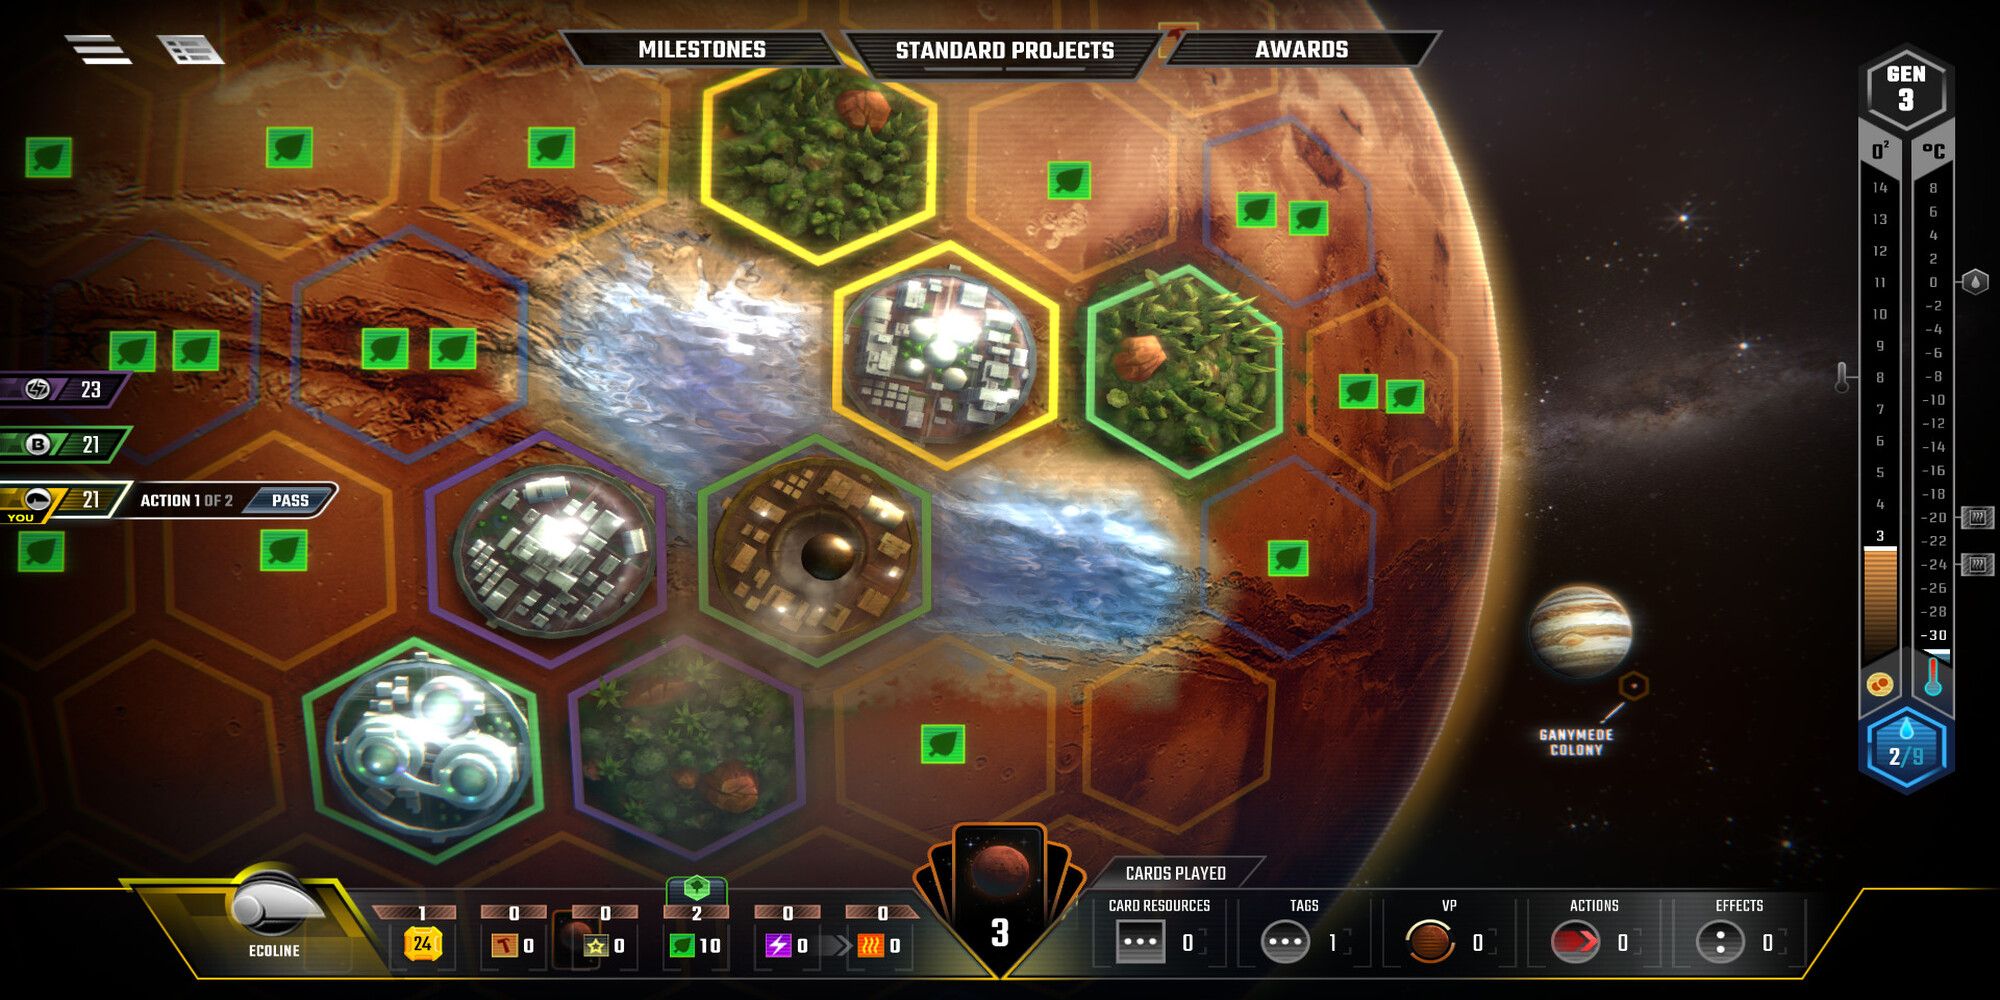 In-Game Screenshot From Terraforming Mars showing the world map grid and various icons